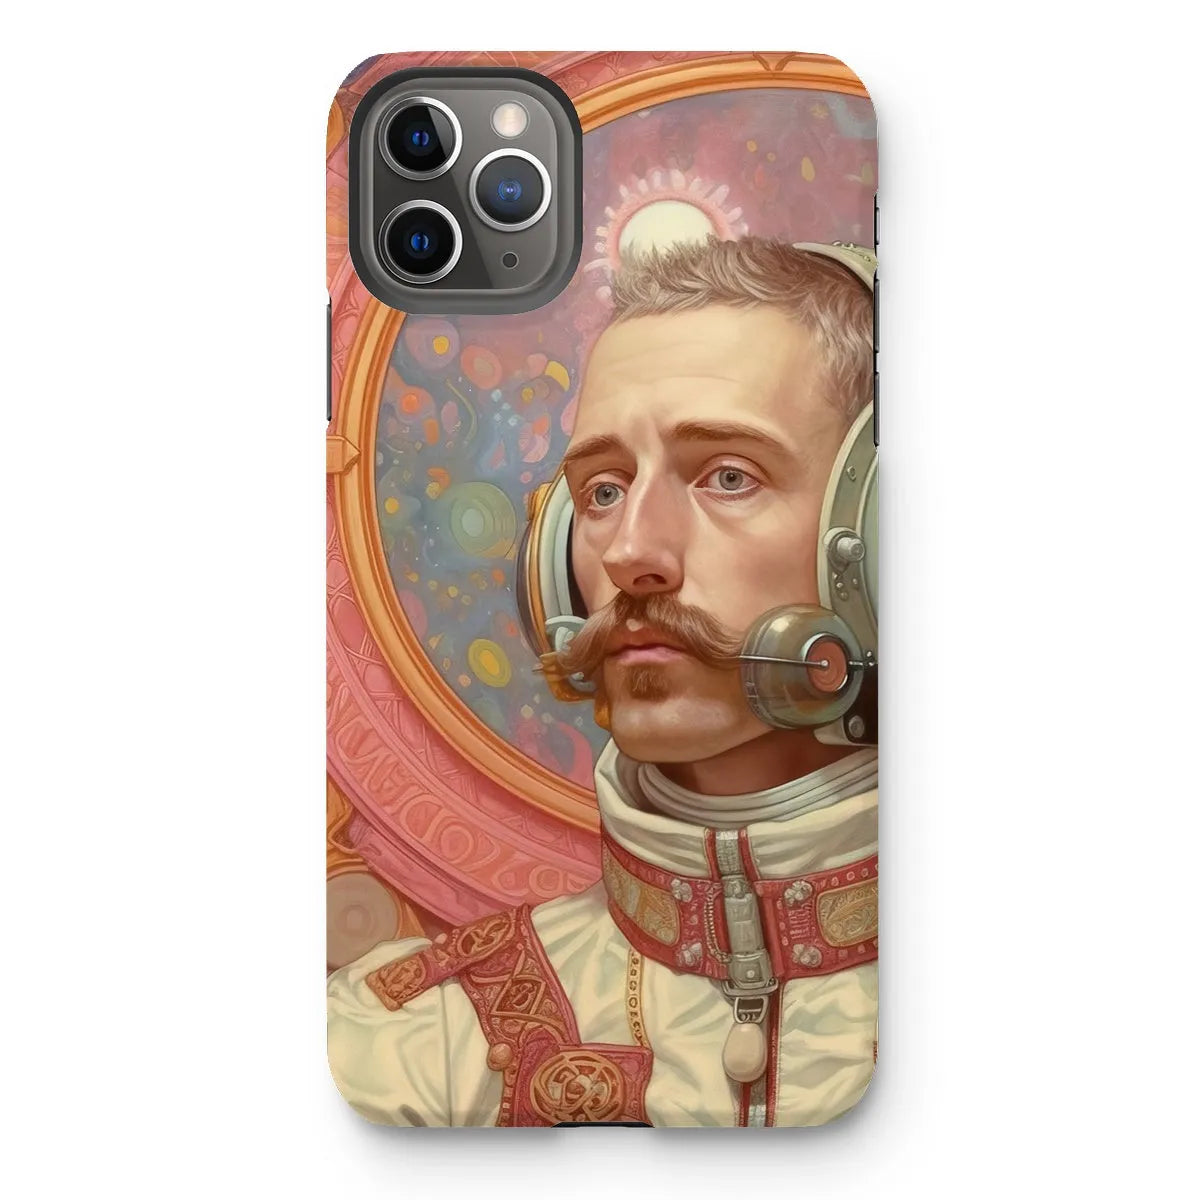 Axel - Gay German Astronaut Aesthetic Art Phone Case - Iphone 11 Pro Max / Matte - Mobile Phone Cases - Aesthetic Art